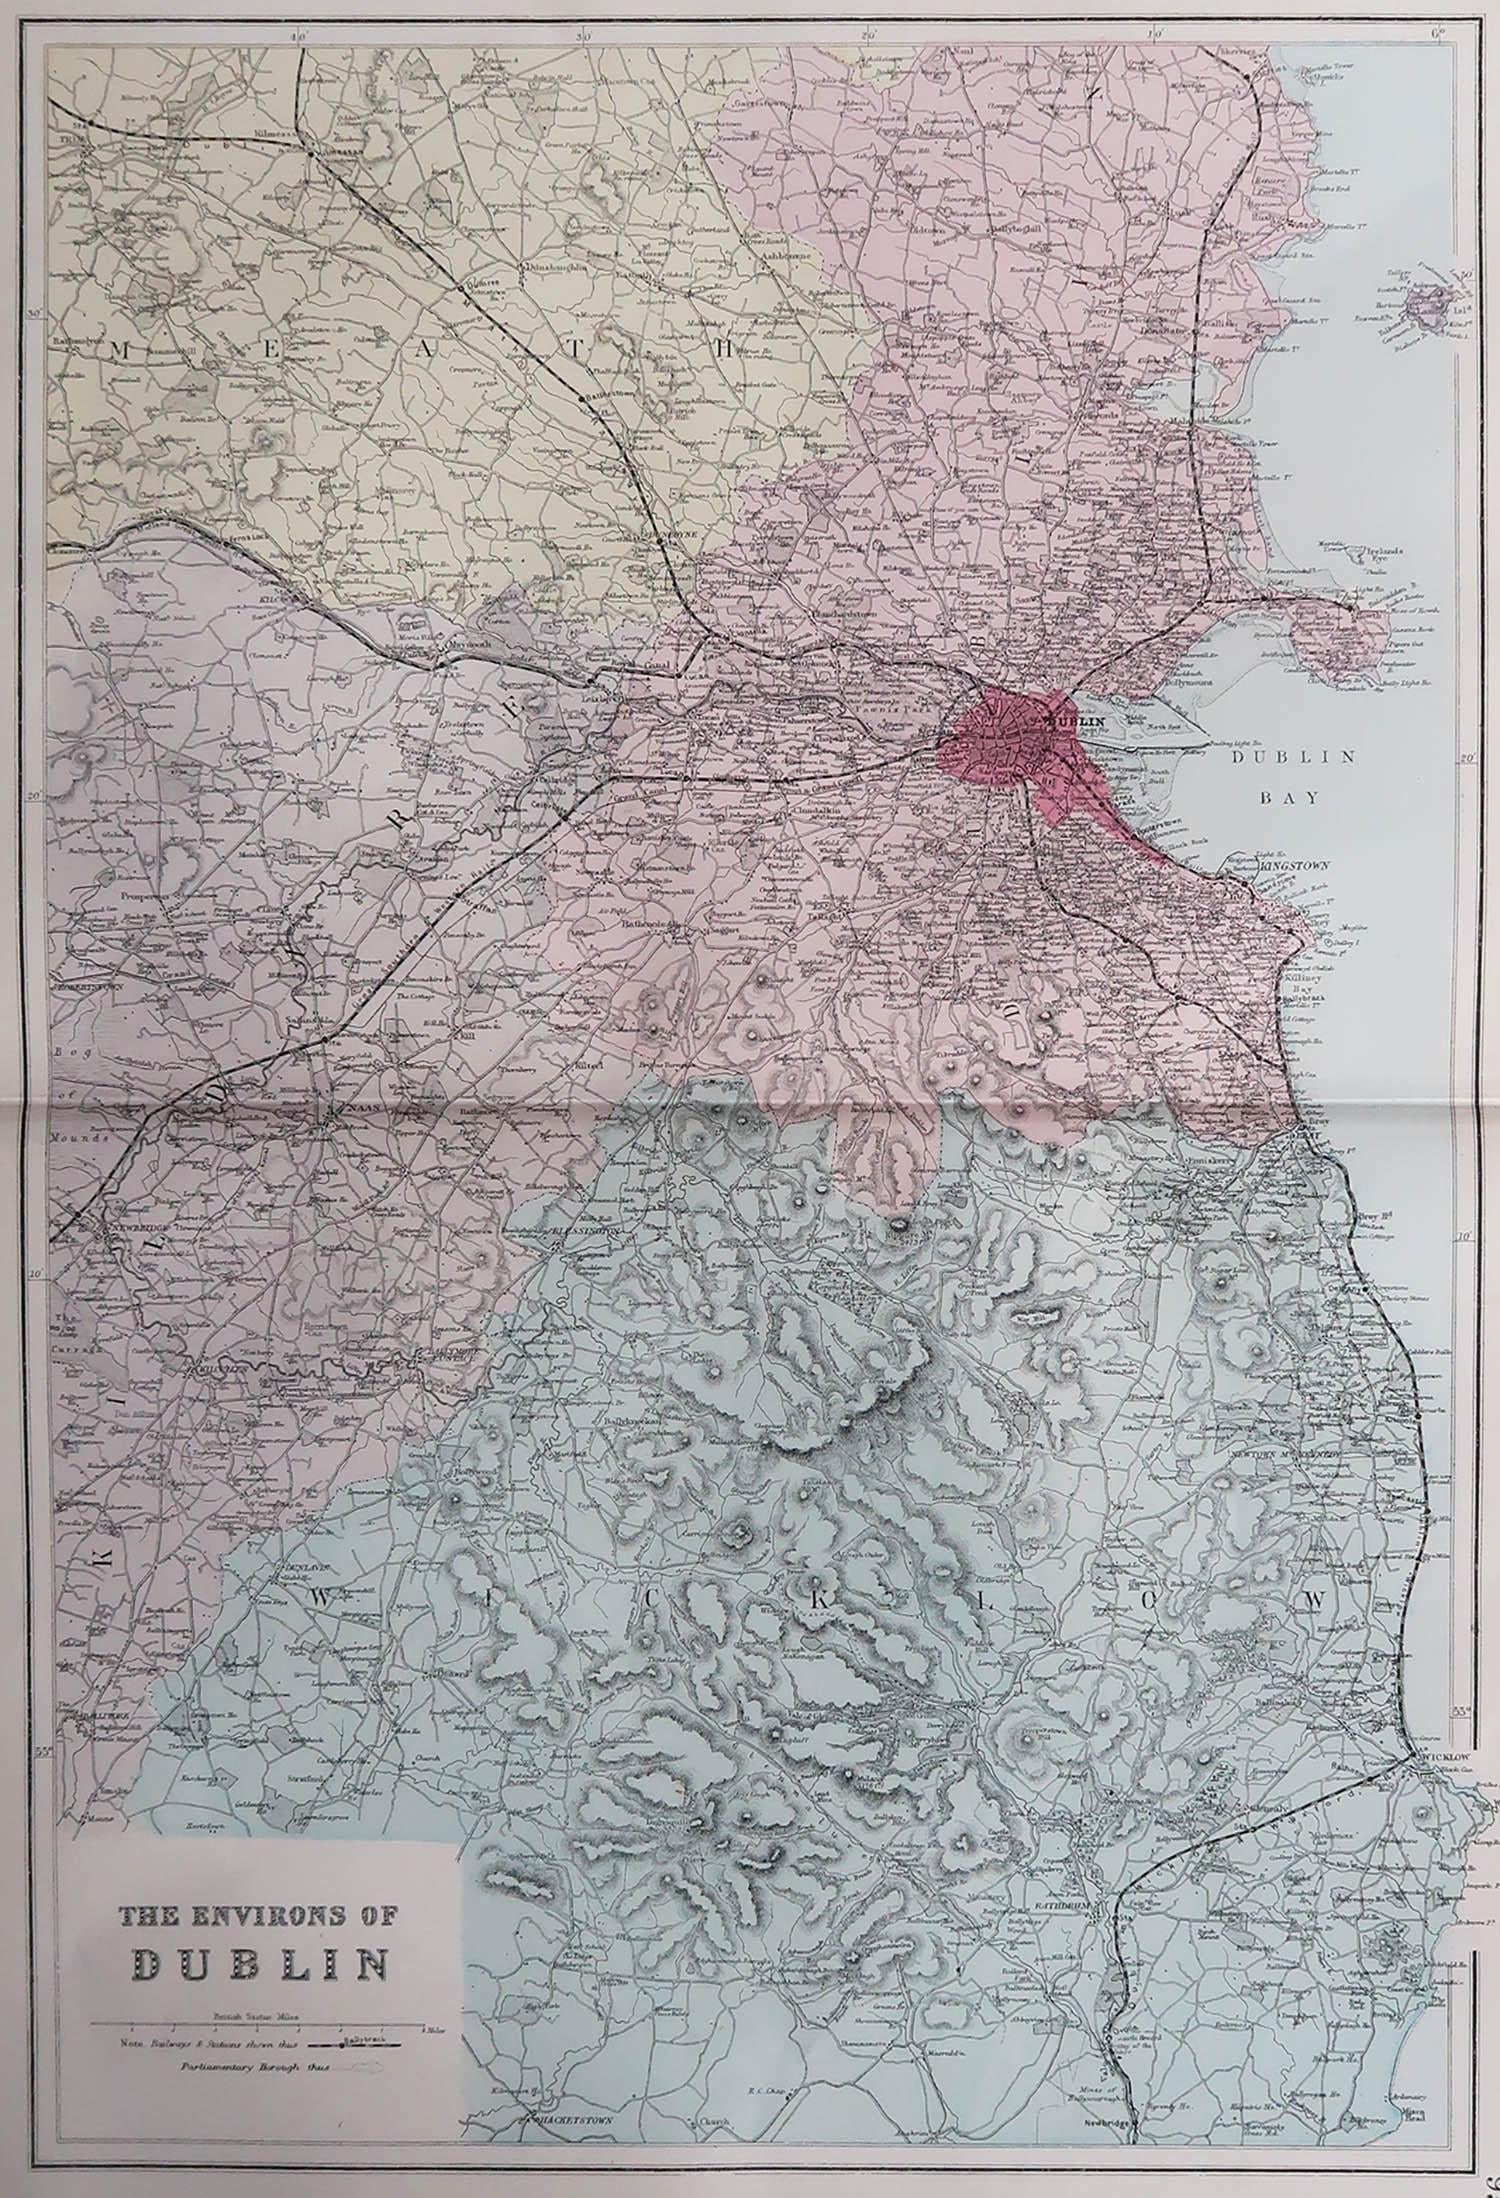 Great map of The Environs of Dublin

Published circa 1880

Unframed

Free shipping.

